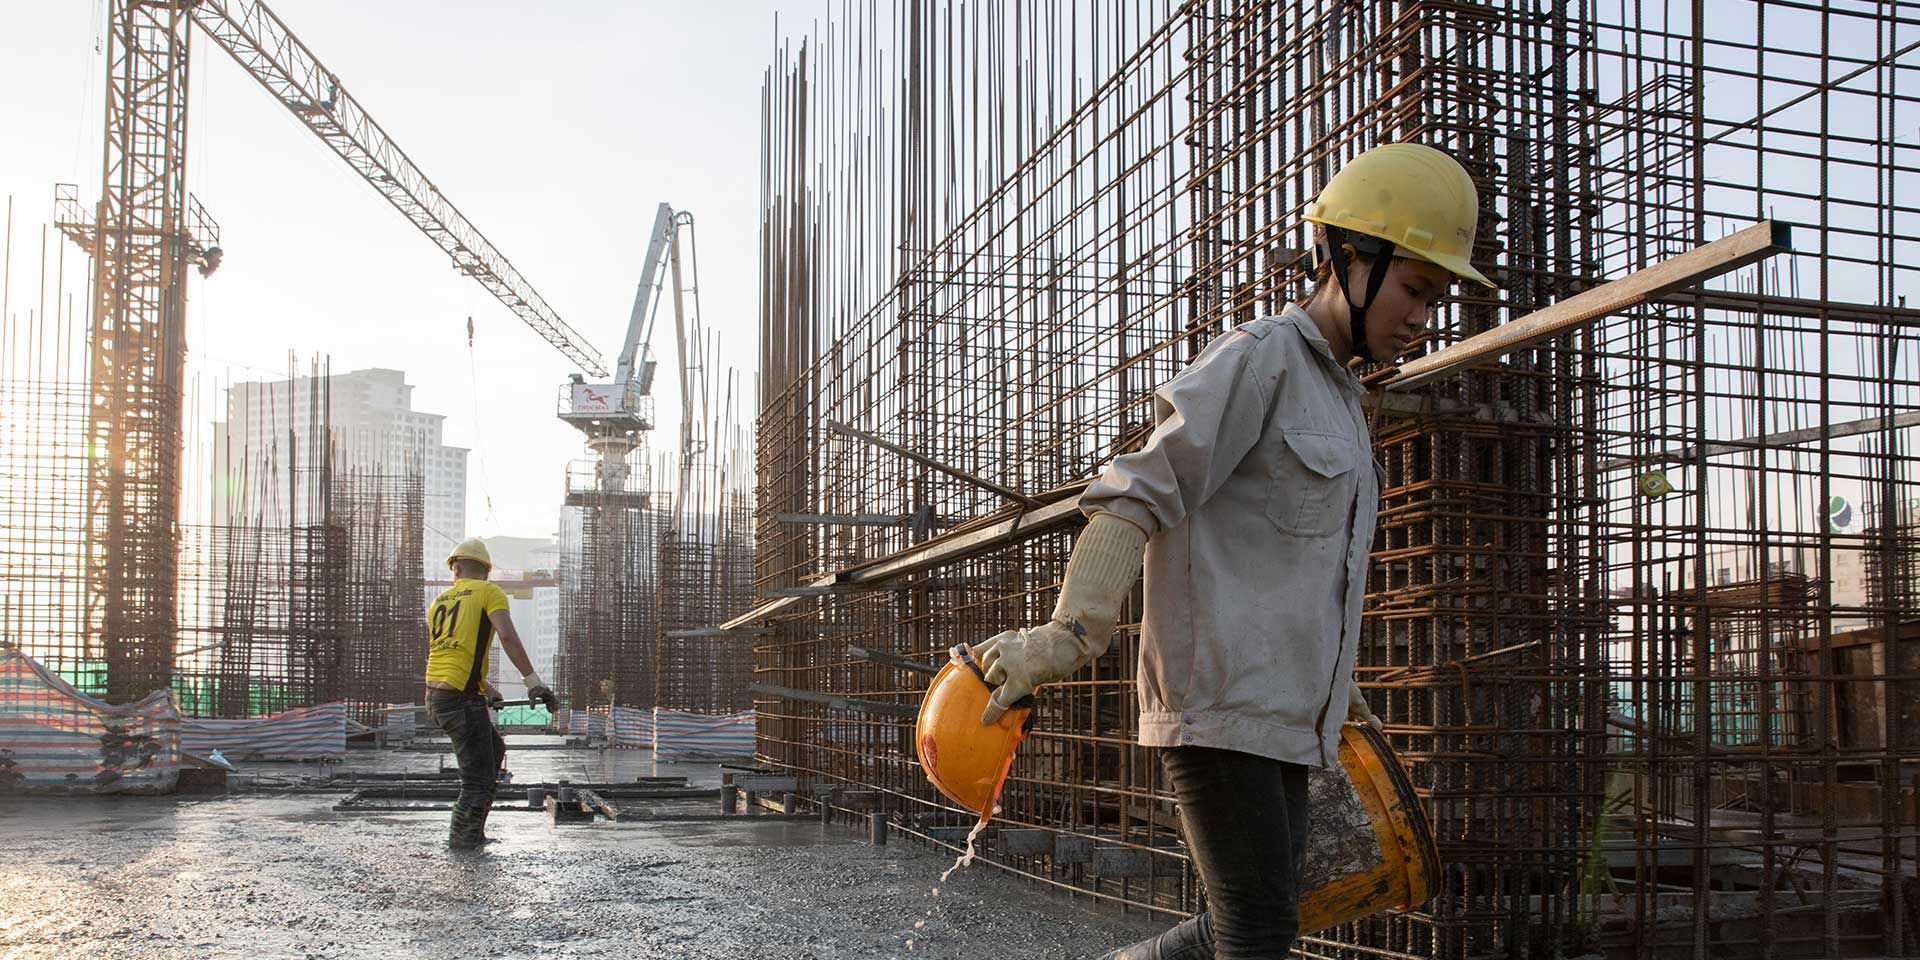 Construction workers carefully lay rebar in preparation to pour concrete on the upper floors of an apartment building Ð the Capital House GroupÕs EcoHome 3 projectÐ in Hanoi, Vietnam on July 28, 2019. This construction project will become an EDGE certified building, an affordable and sustainable housing development in Hanoi. IFC created EDGE (Excellence in Design for Greater Efficiencies)-- a building resource efficiency certification program--especially for emerging markets like Vietnam. Photo © Dominic Chavez/International Finance Corporation